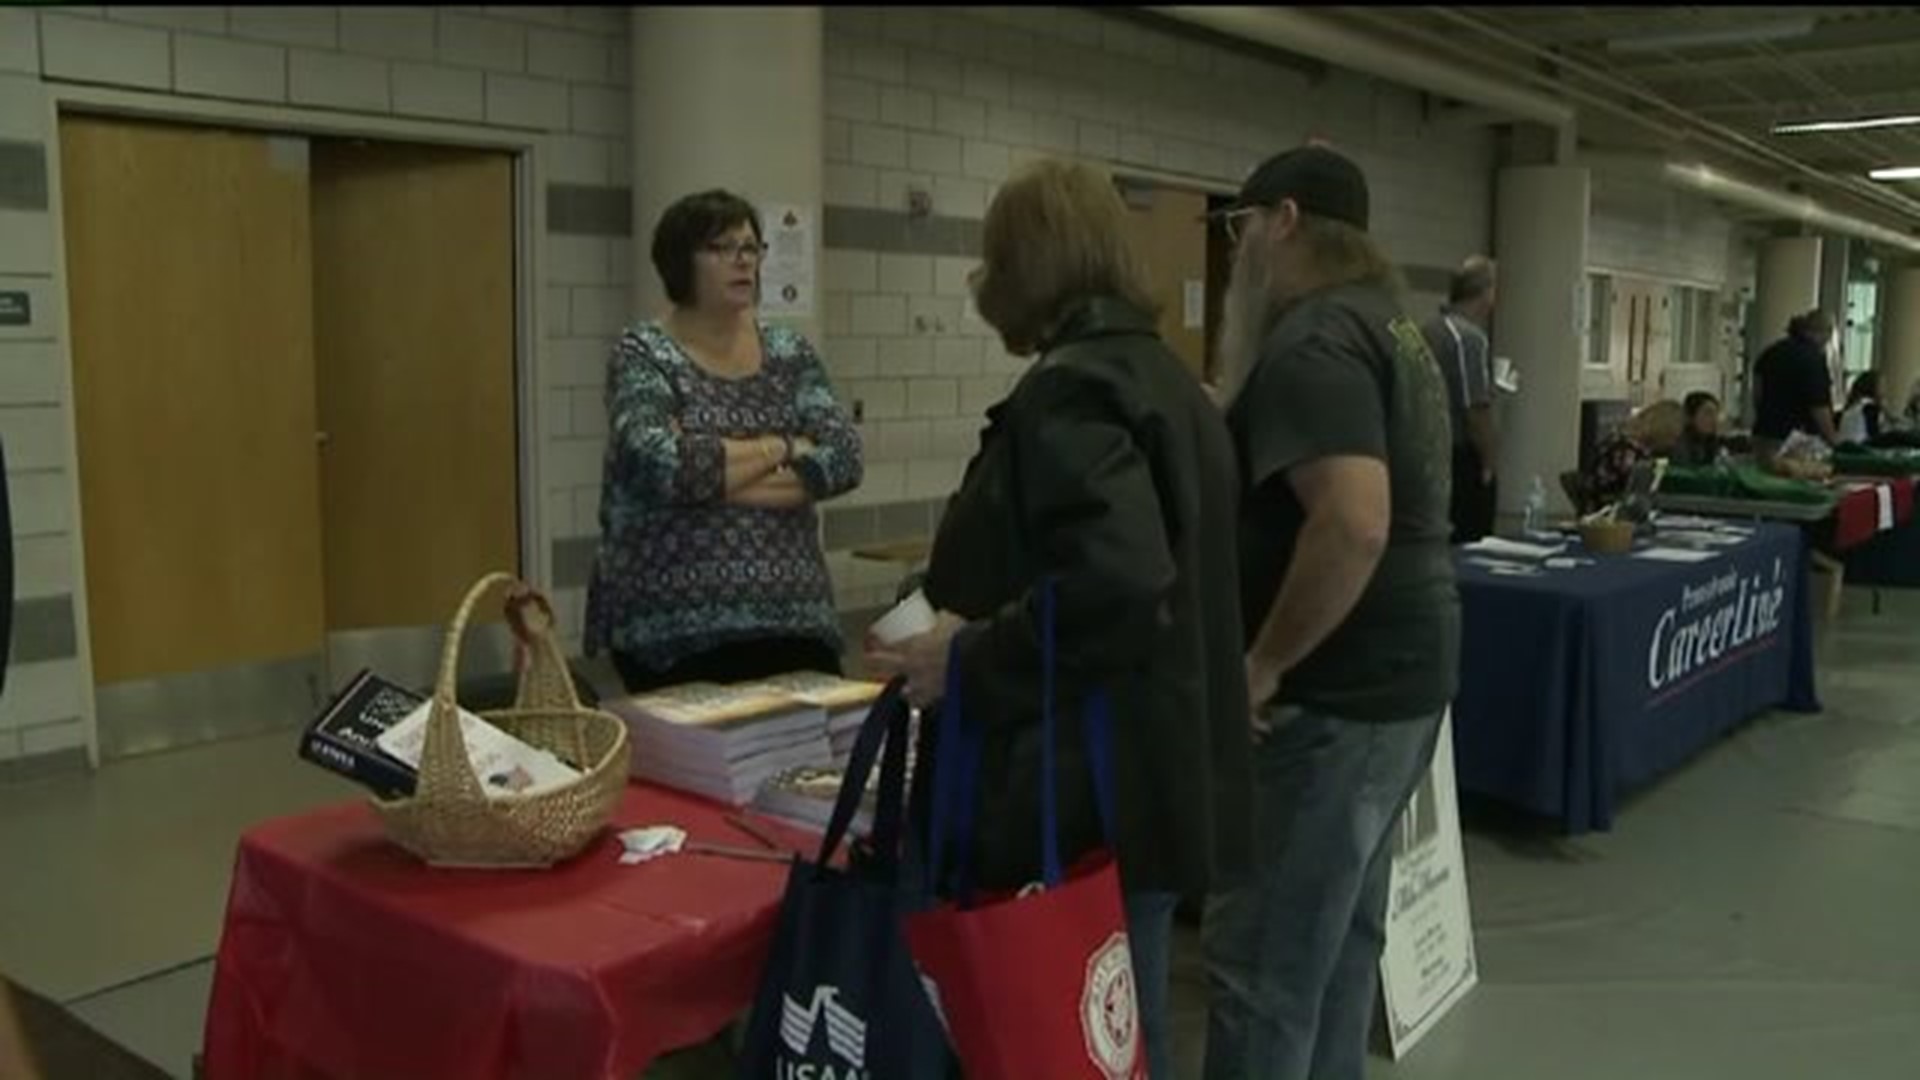 Support for Veterans in Clinton County